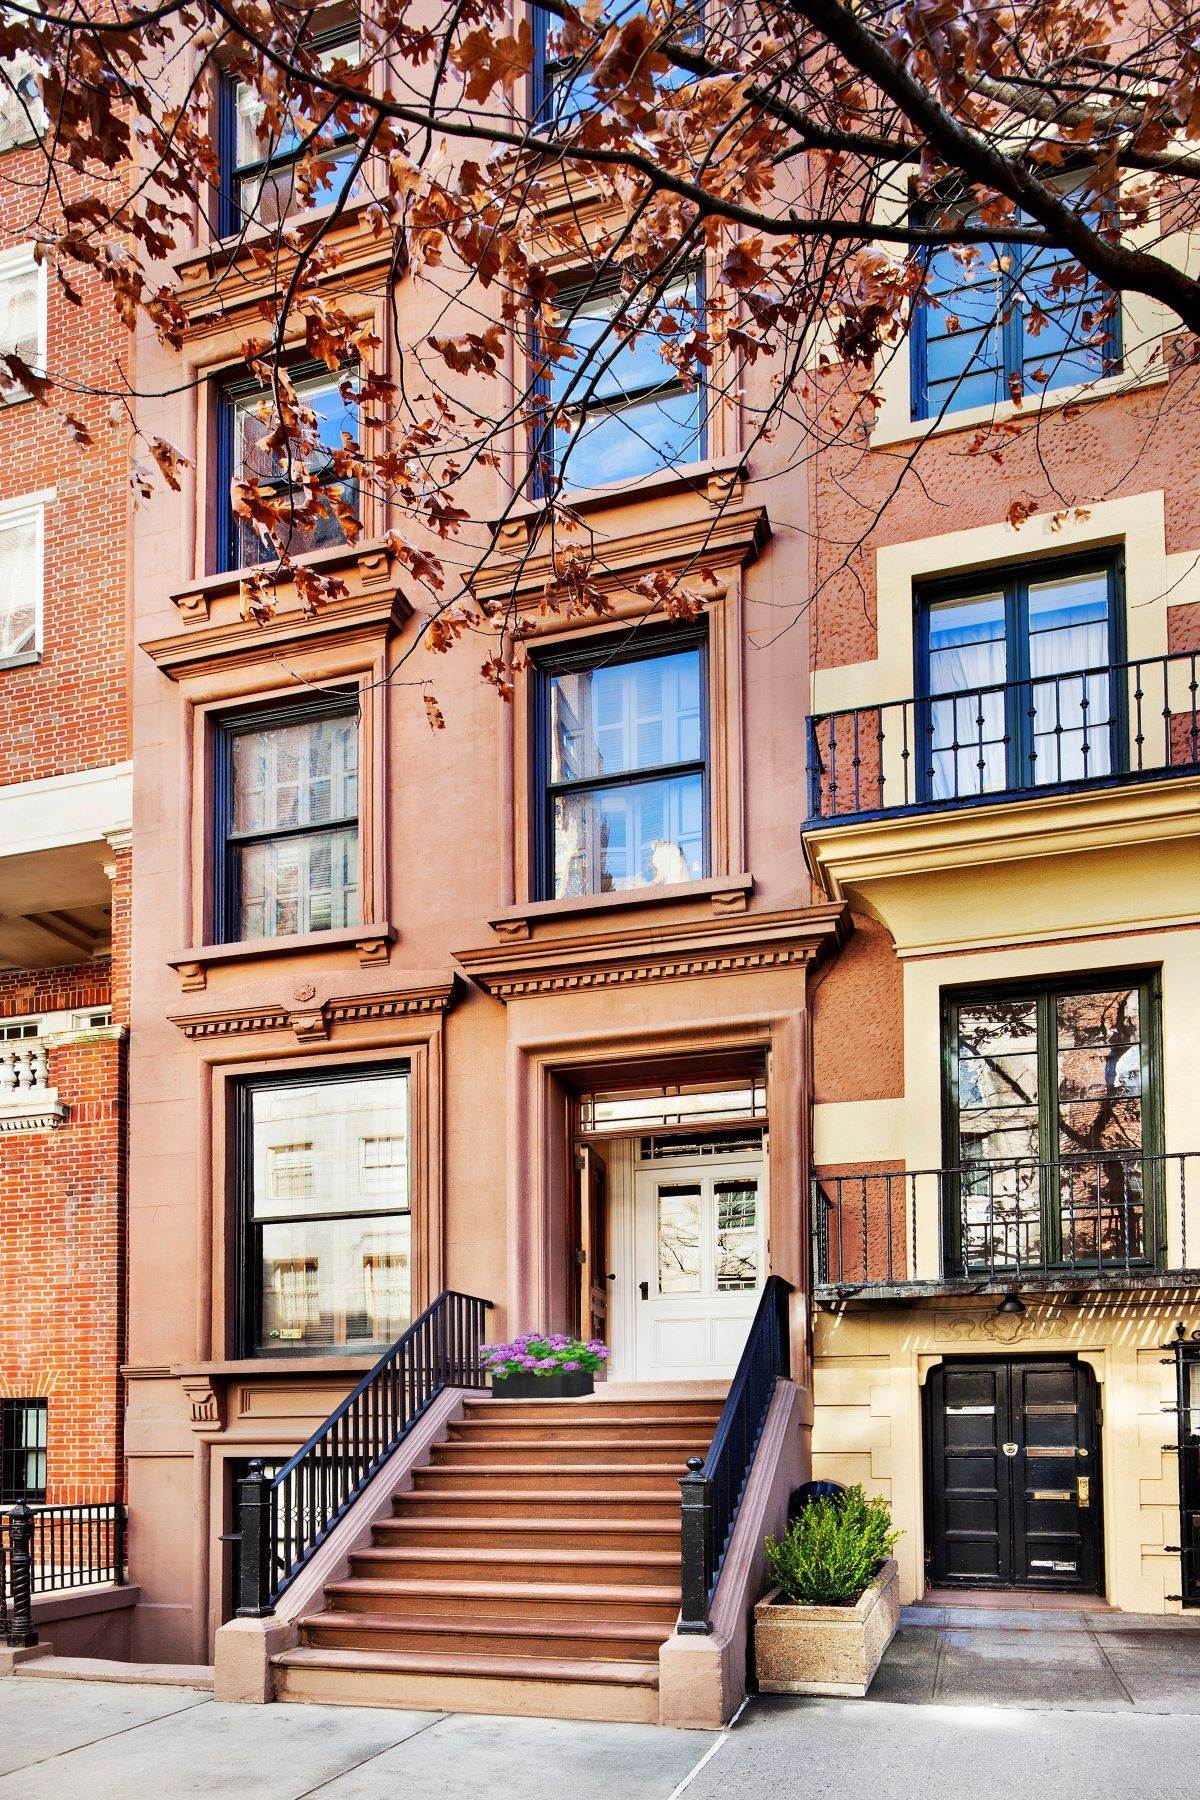 Townhouse at 38 East 70th Street New York, New York 10021 United States